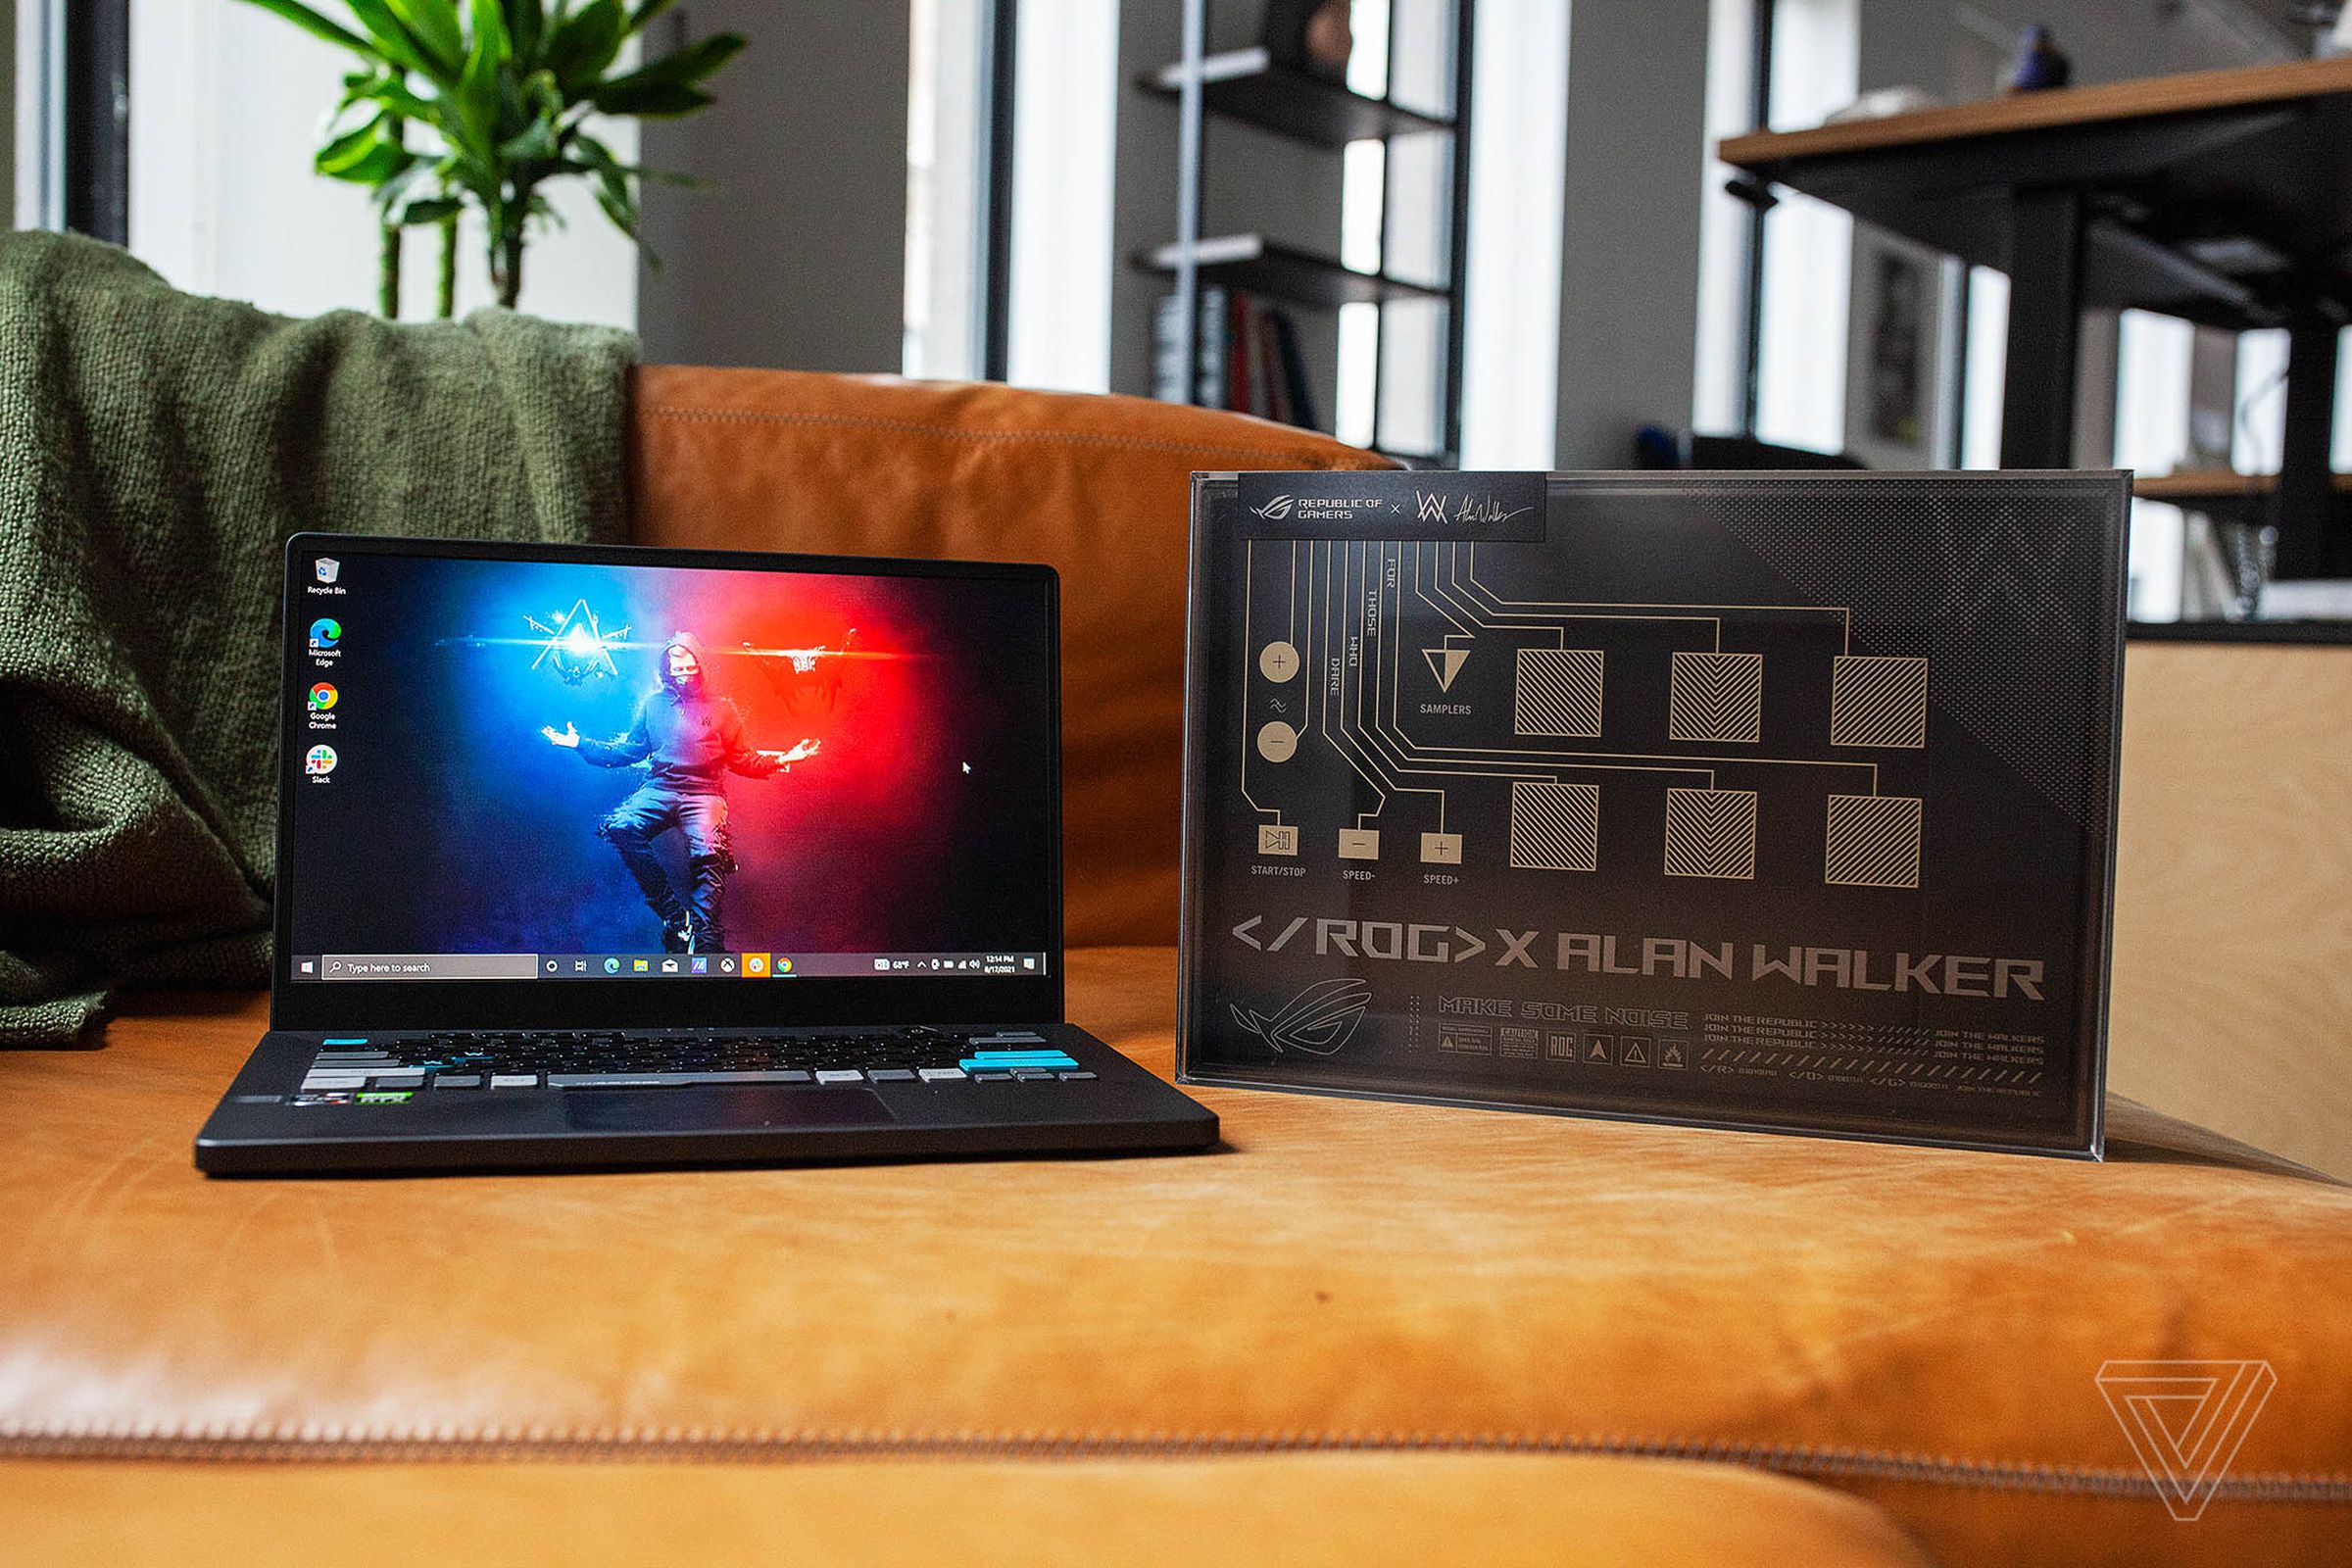 The Asus ROG Zephyrus G14 Alan Walker Edition on a couch seen from the front, open. The screen displays Alan Walker hovering on a red and blue background, conjuring lights of each color with his hands. To its left is its box, with 11 DJ buttons and ROG X ALAN WALKER printed on the bottom.